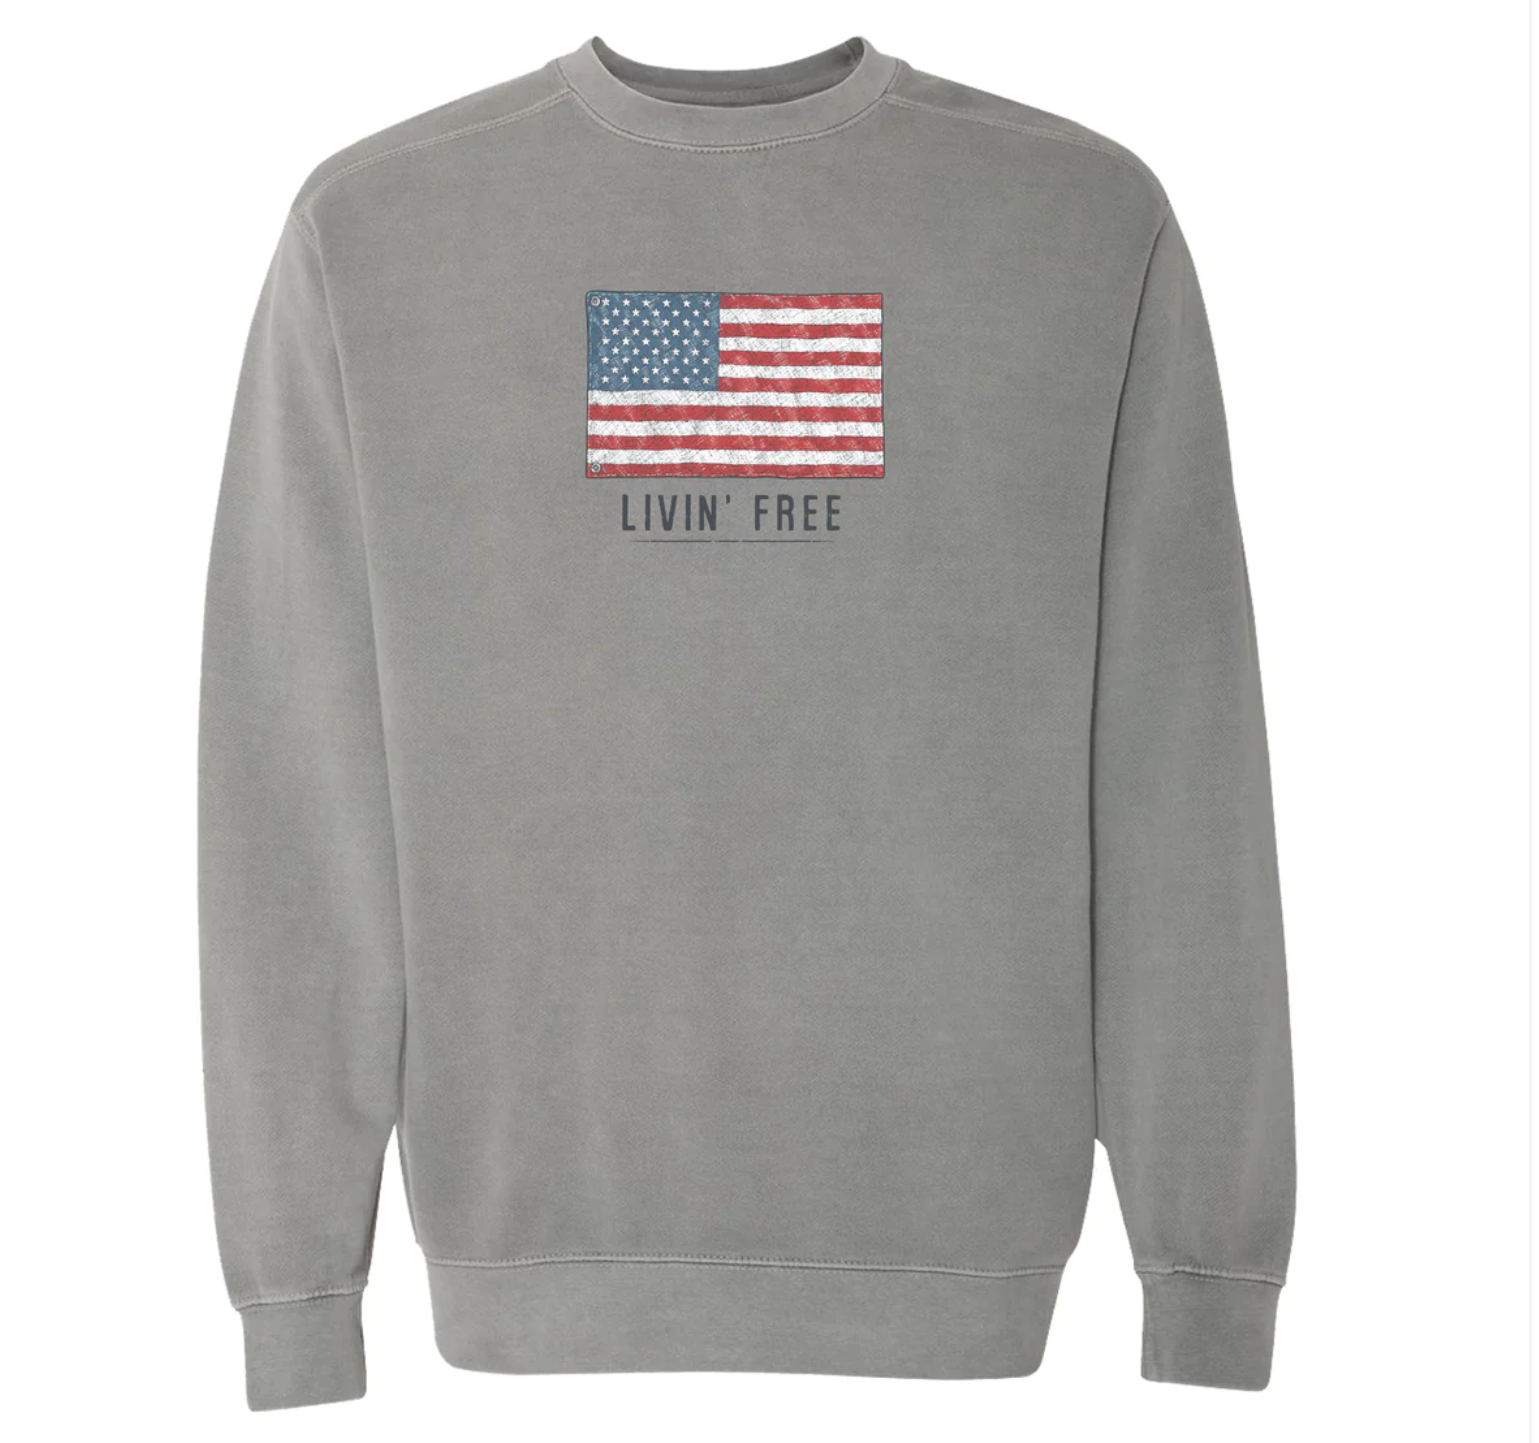 Southern Fried Cotton Livin' Free in the USA Sweatshirt